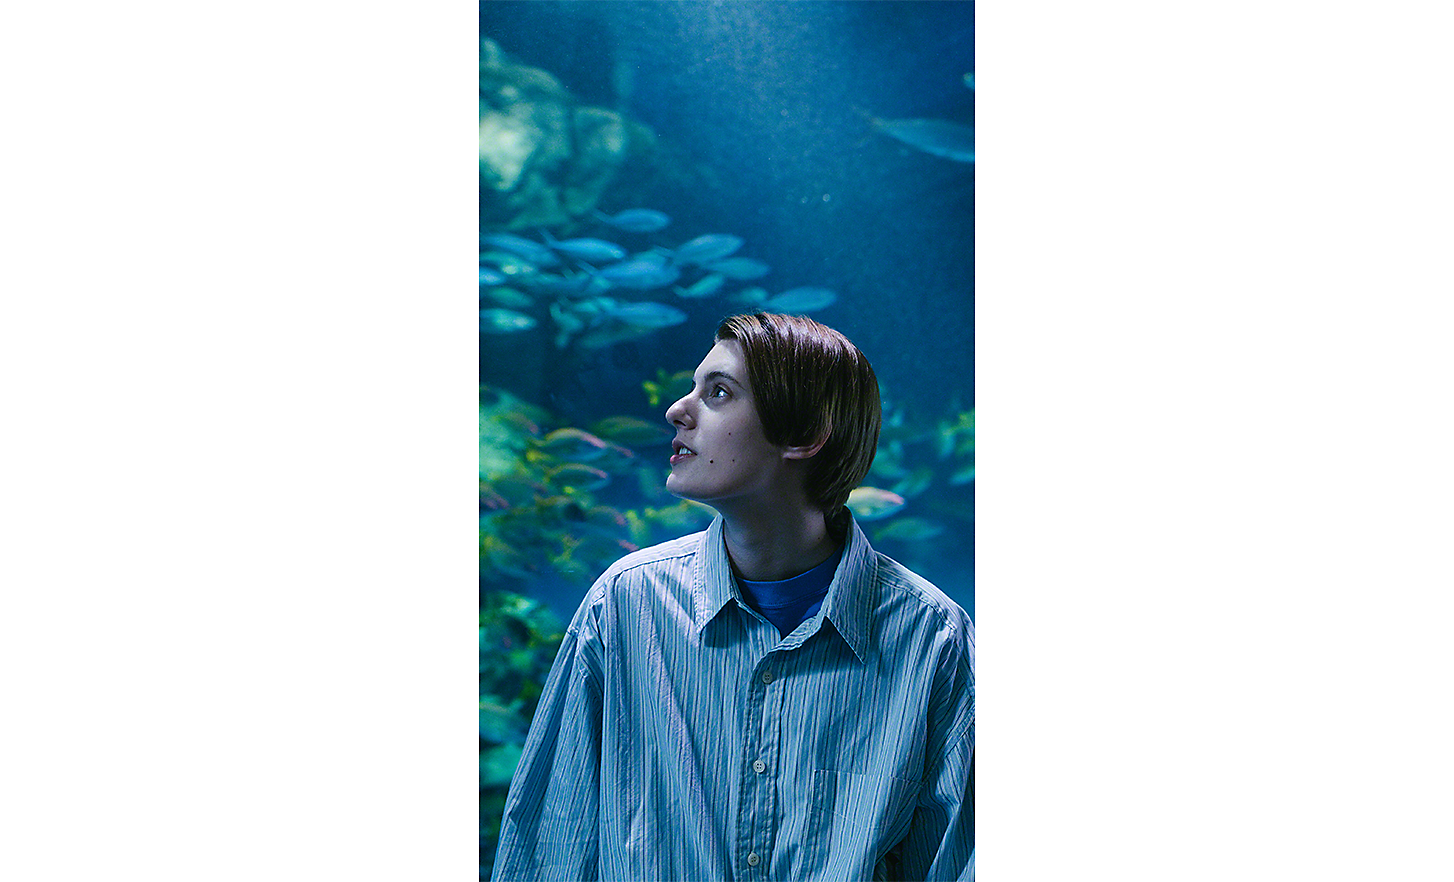 Portrait of a young woman with an aquarium in the background